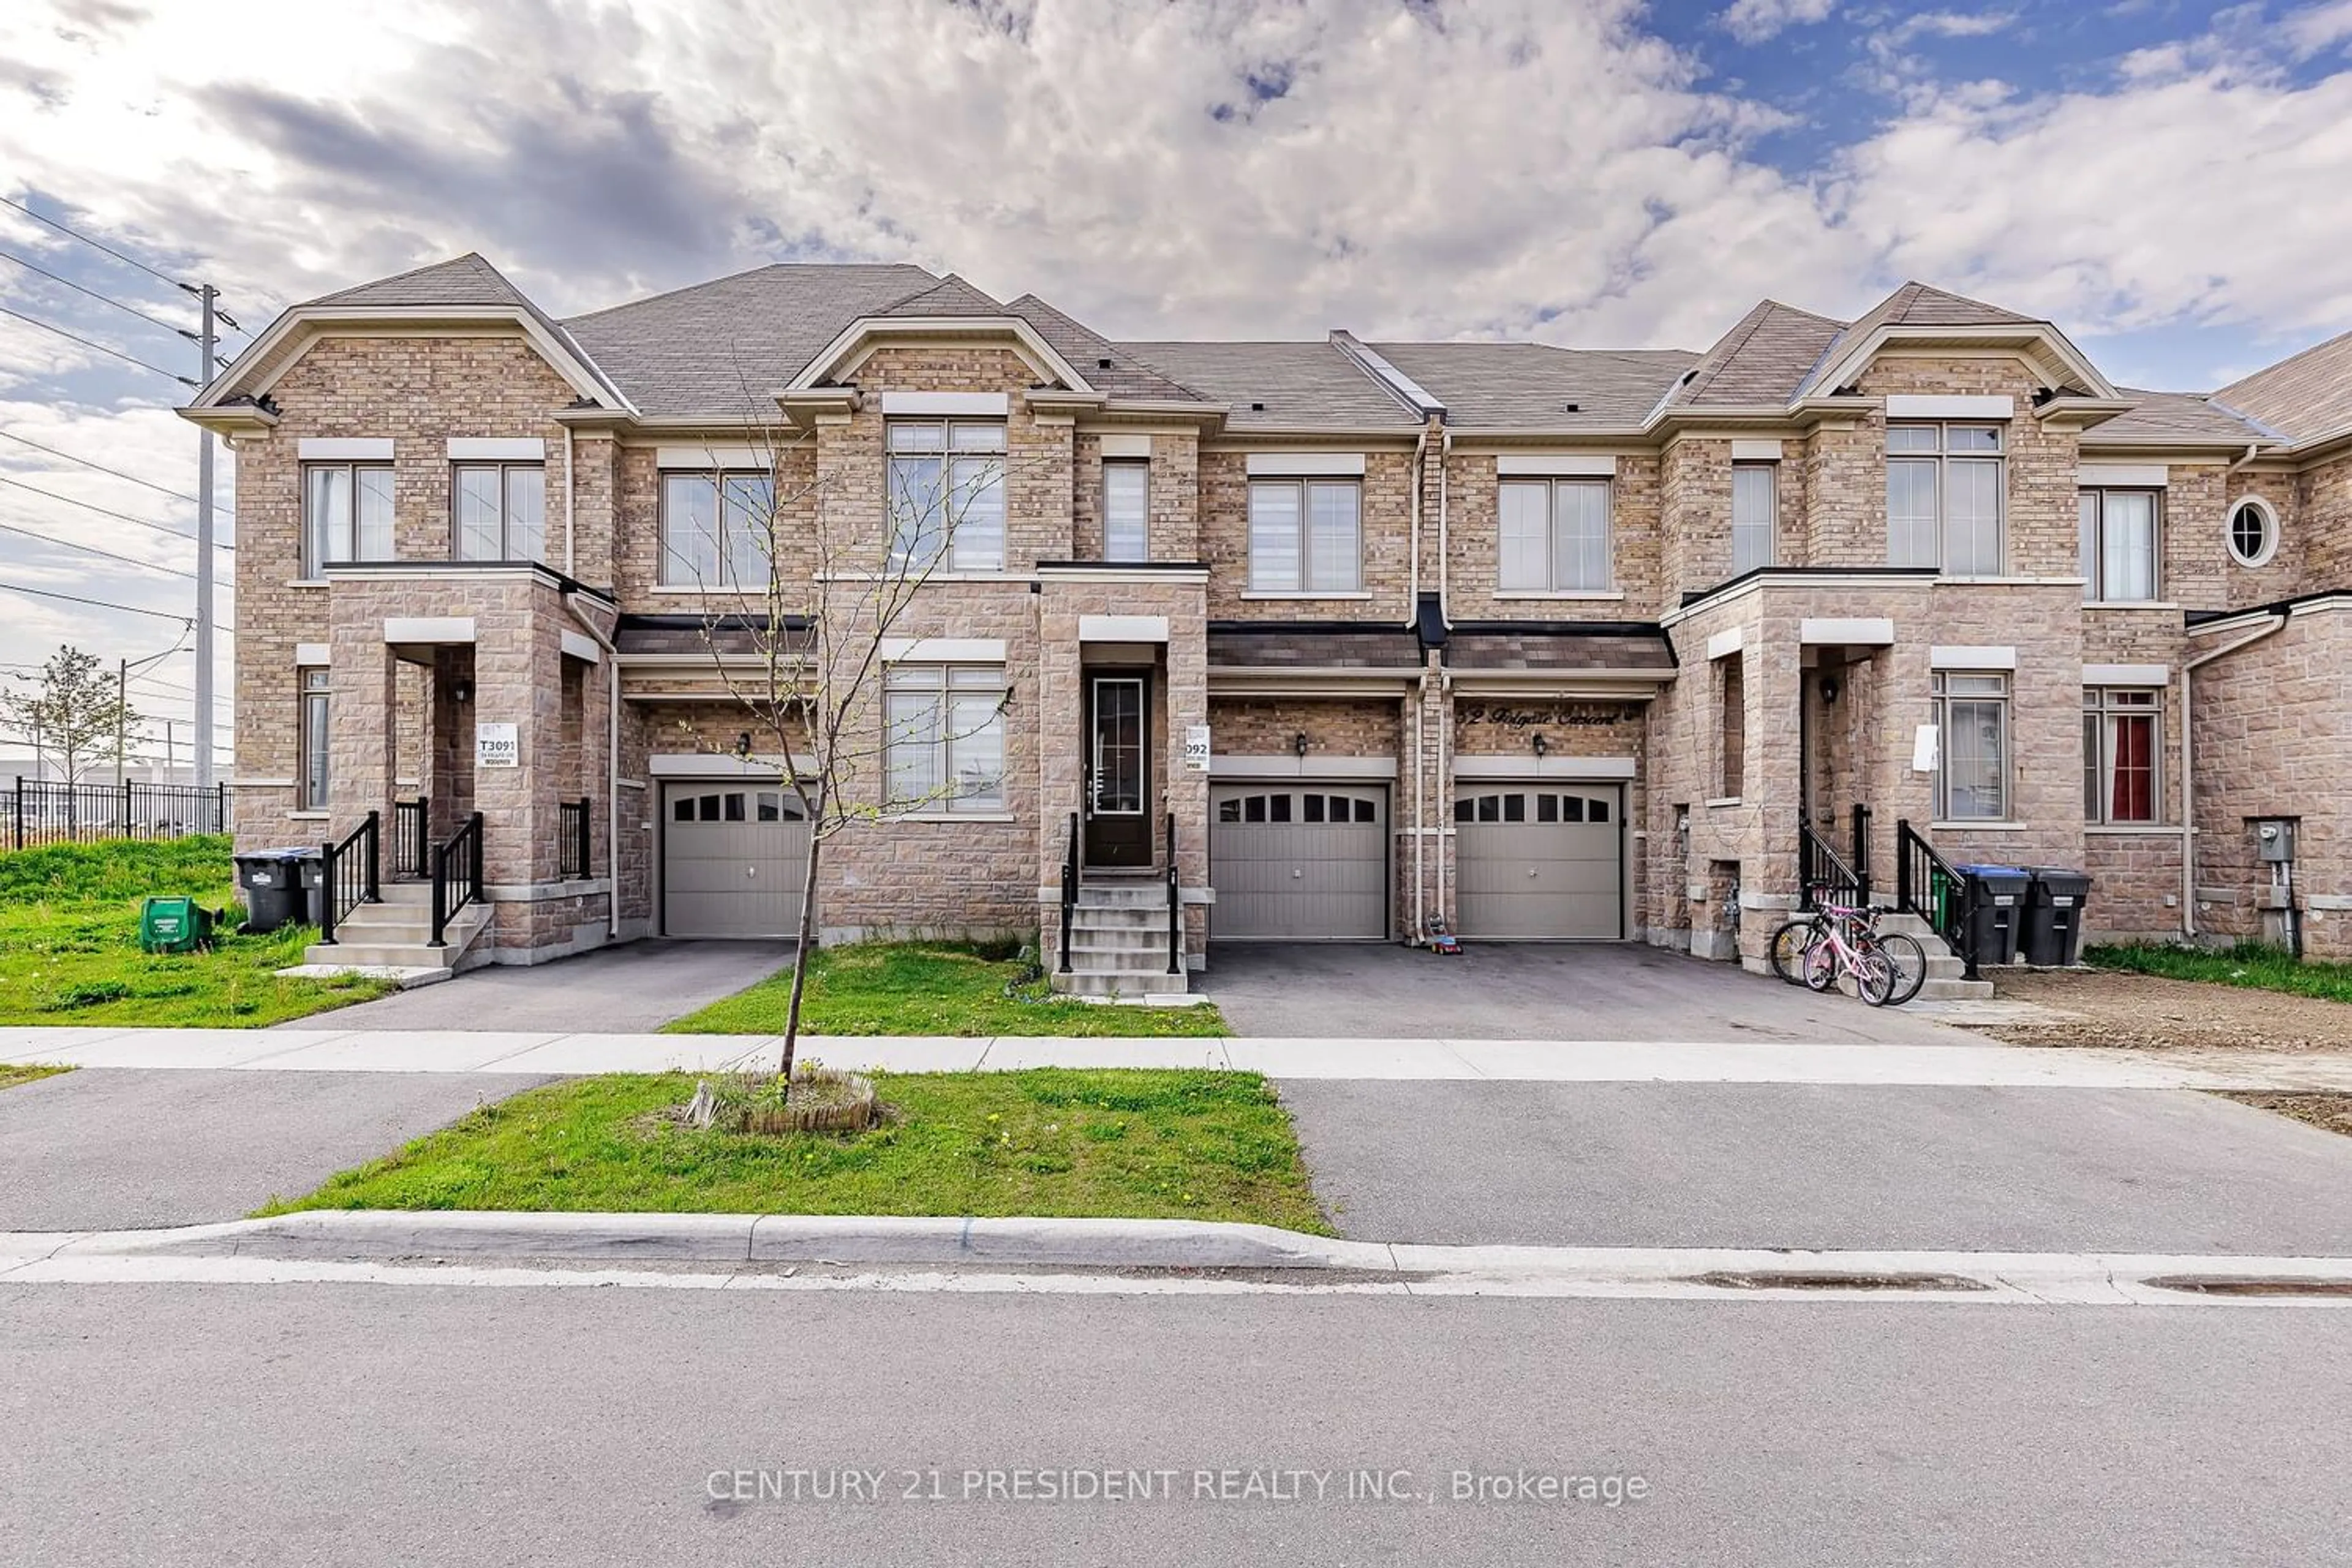 A pic from exterior of the house or condo for 54 Folgate Cres, Brampton Ontario L6R 4A8